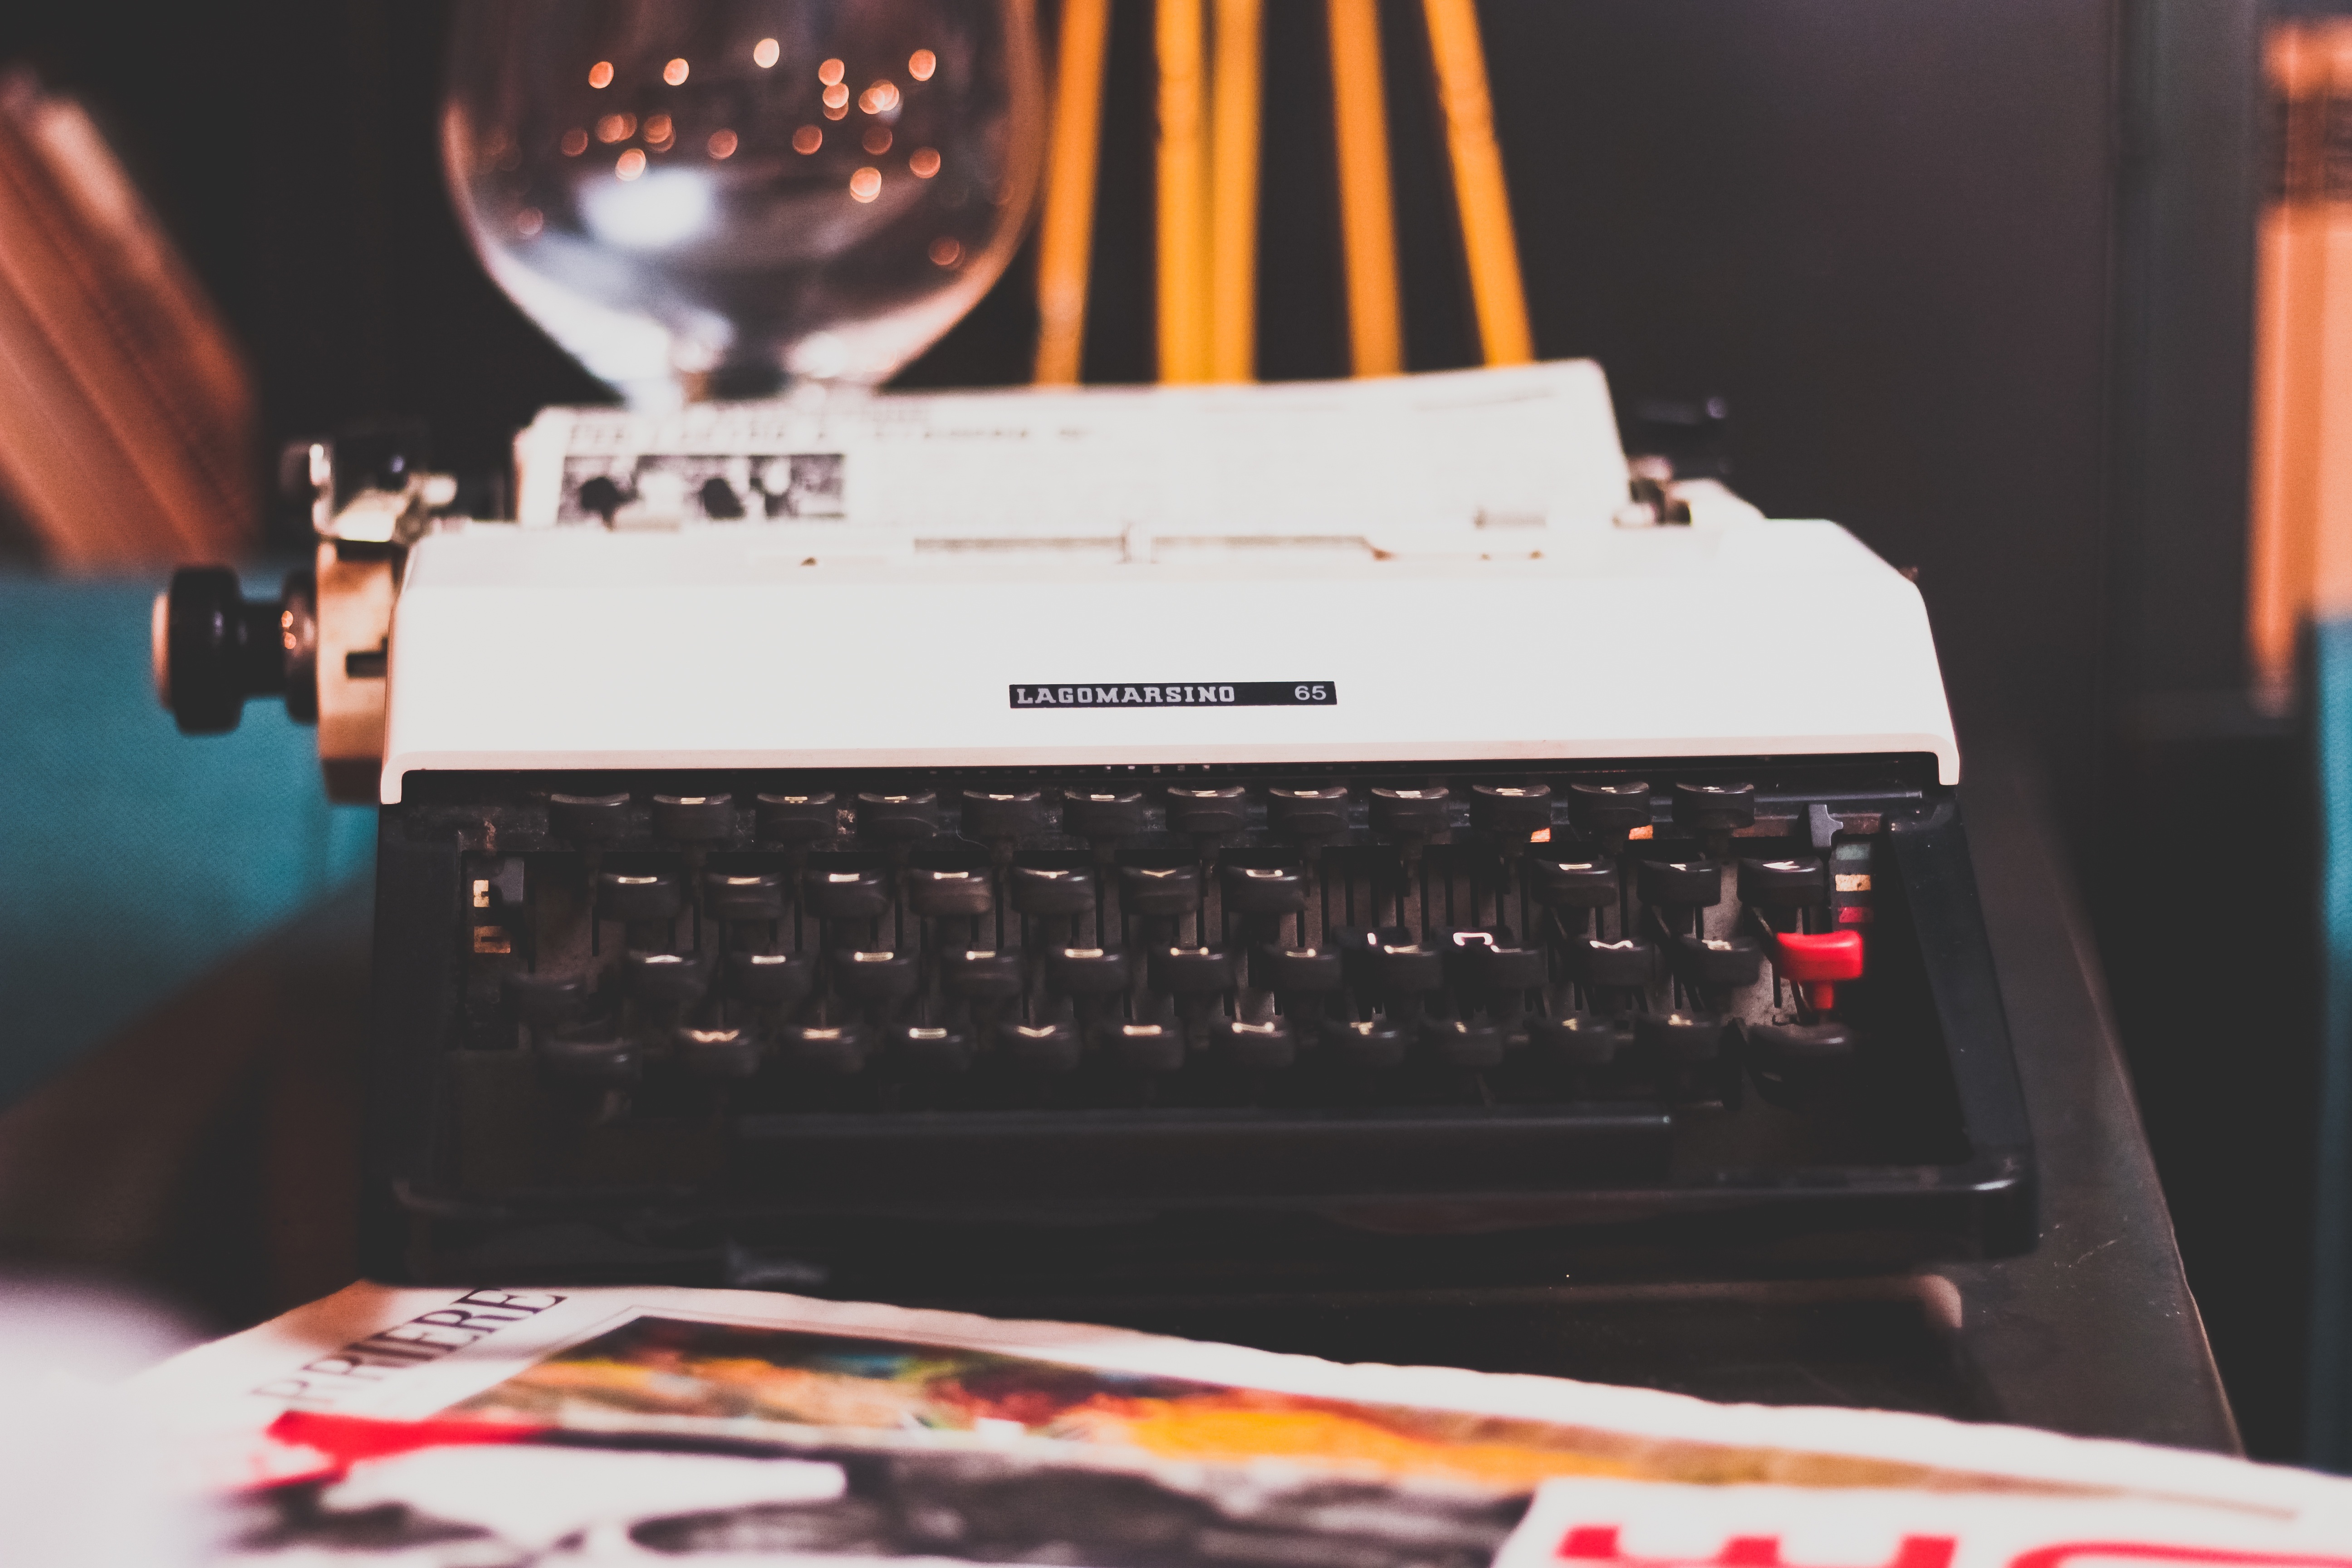 retro, typewriter, miscellaneous, miscellanea collection of HD images